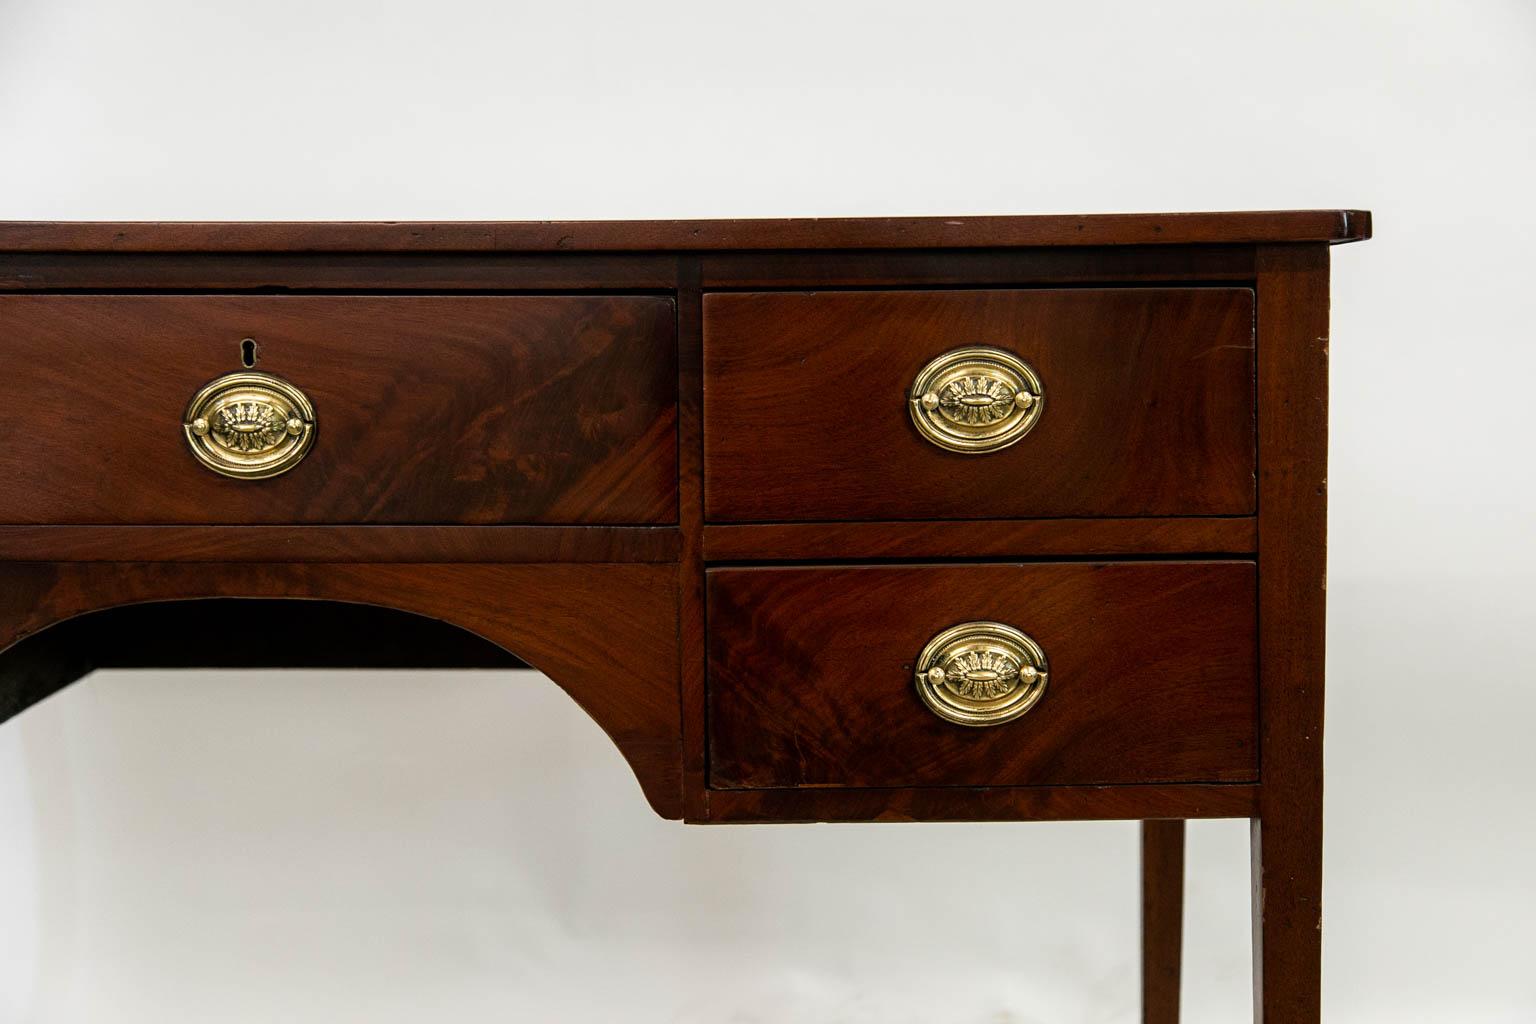 The drawer fronts of this server are flame grain mahogany. The lock is original and brasses are later. The front and sides are banded with a strip of mahogany.